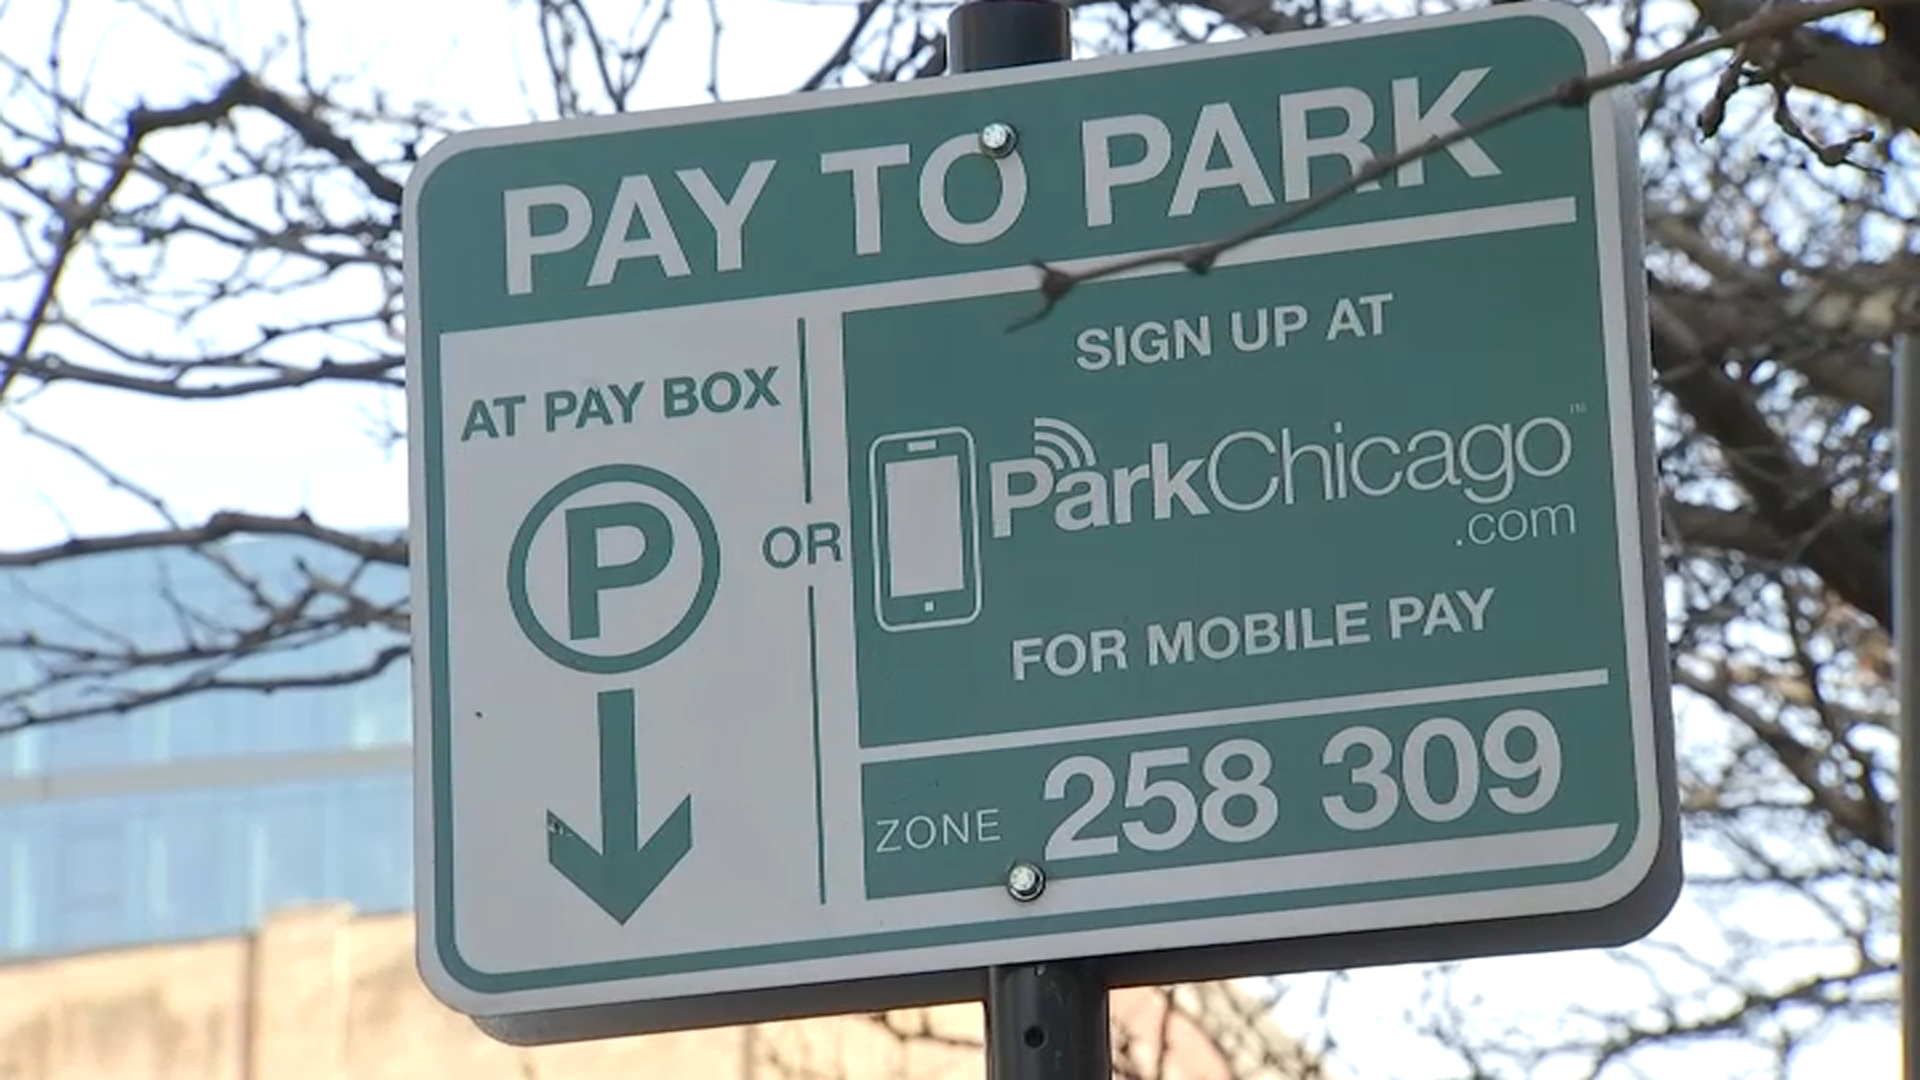 City of Chicago Passes New Meters and Residential Parking in the West Loop  — West Central Association - Chamber of Commerce